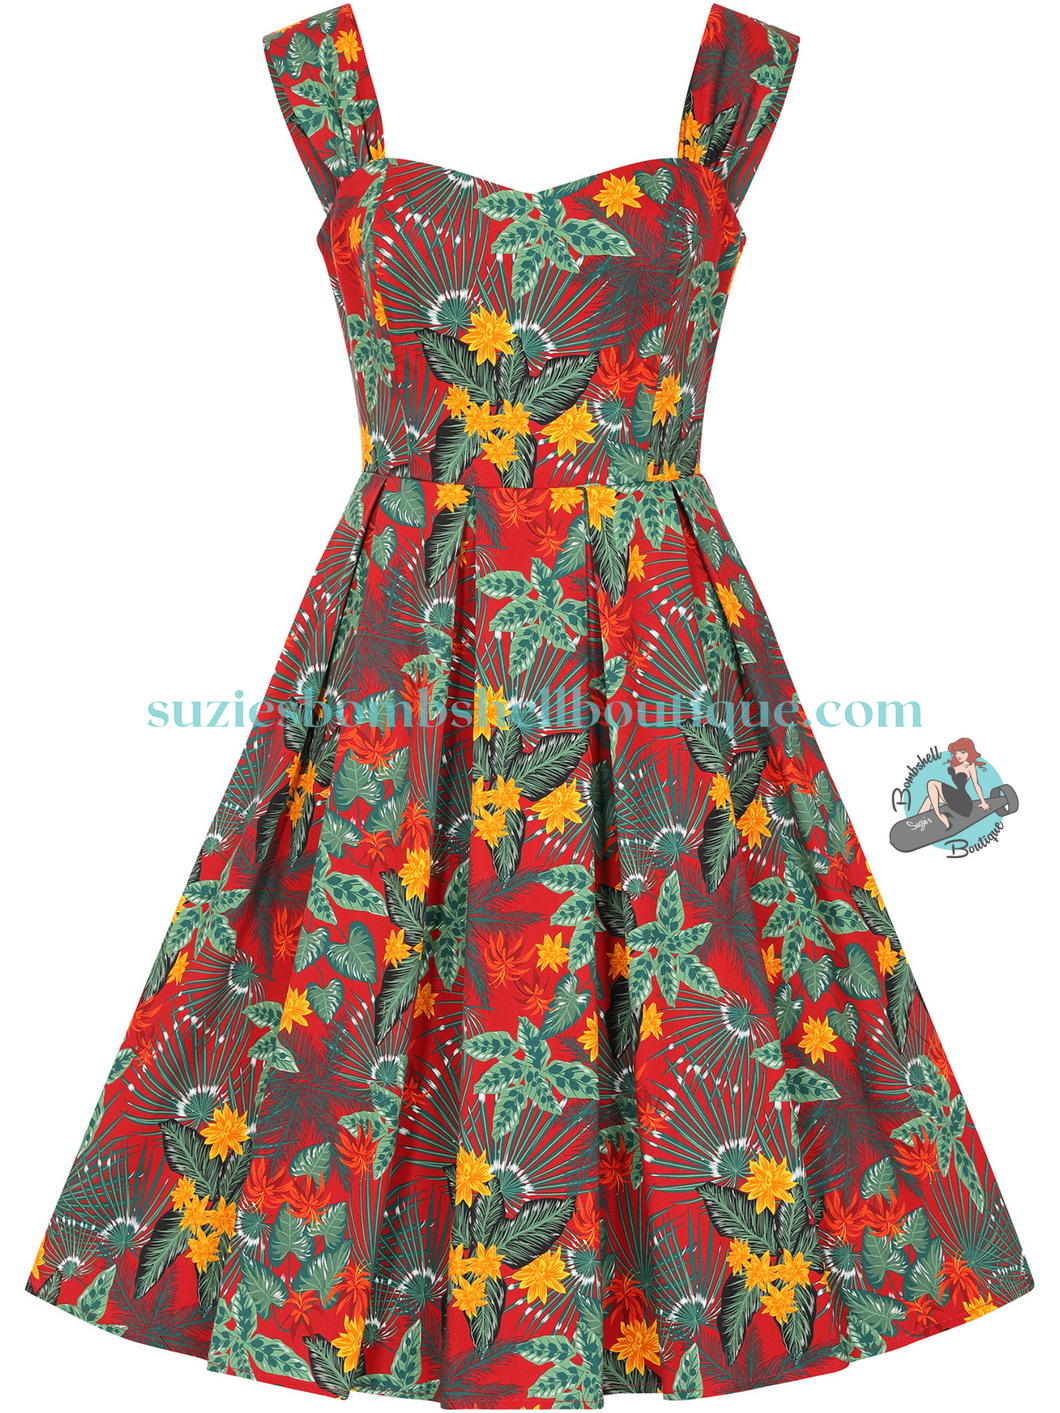 Collectif Jill Jungle Floral Swing Dress retro vintage pinup tiki rockabilly 1950s 50s dress sundress for women Canadian Pin-Up Shop Suzie's Bombshell Boutique